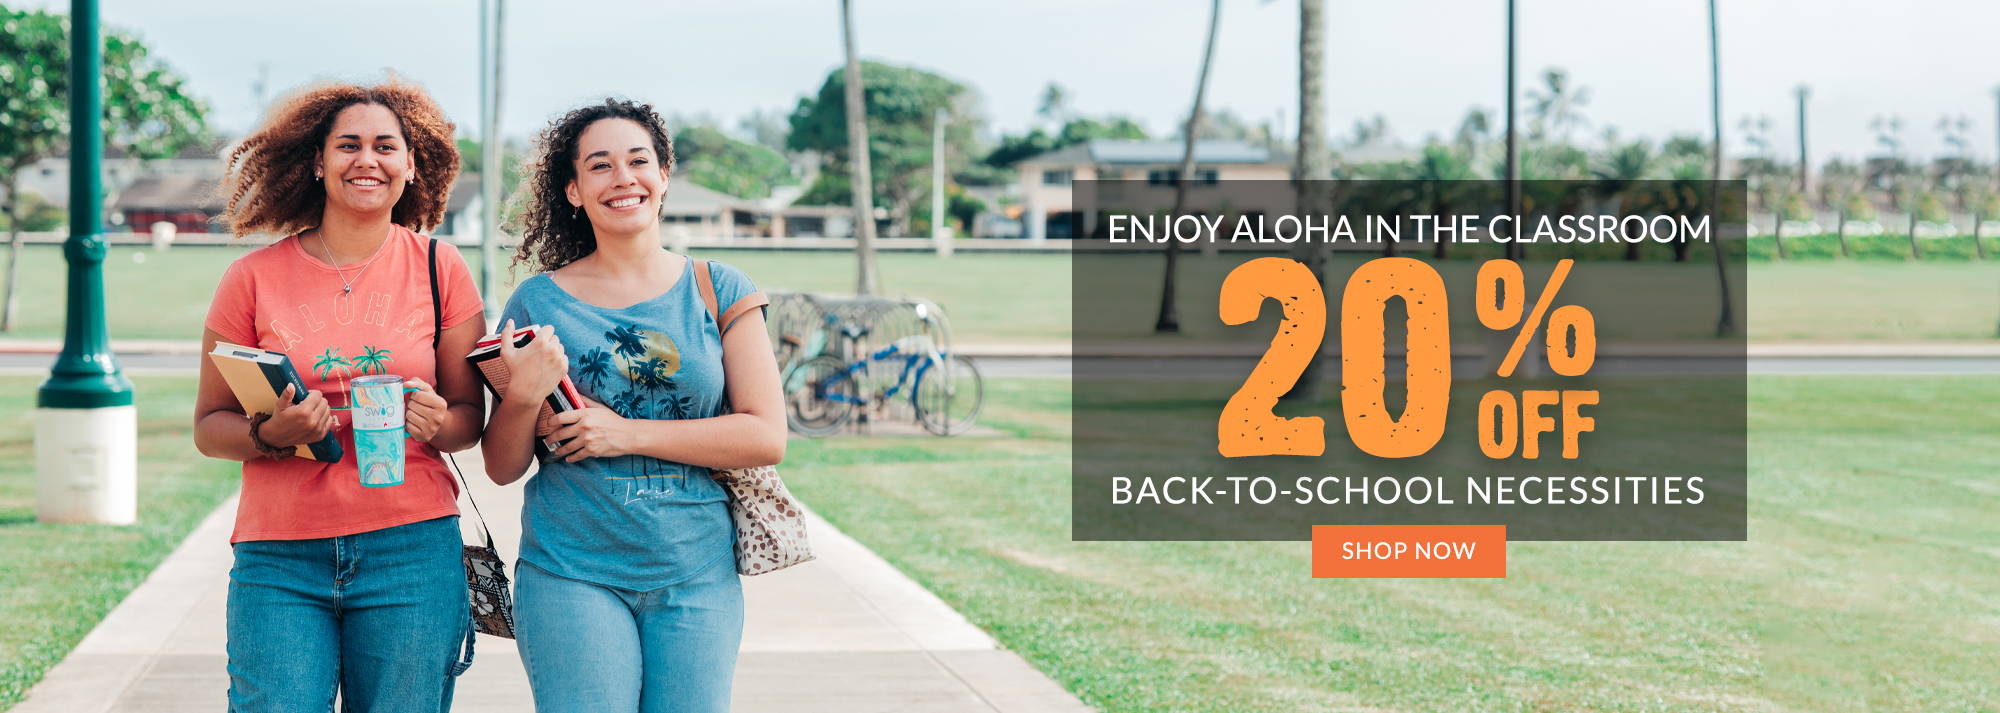 Say aloha to learning with 20% off these
back-to-school necessities